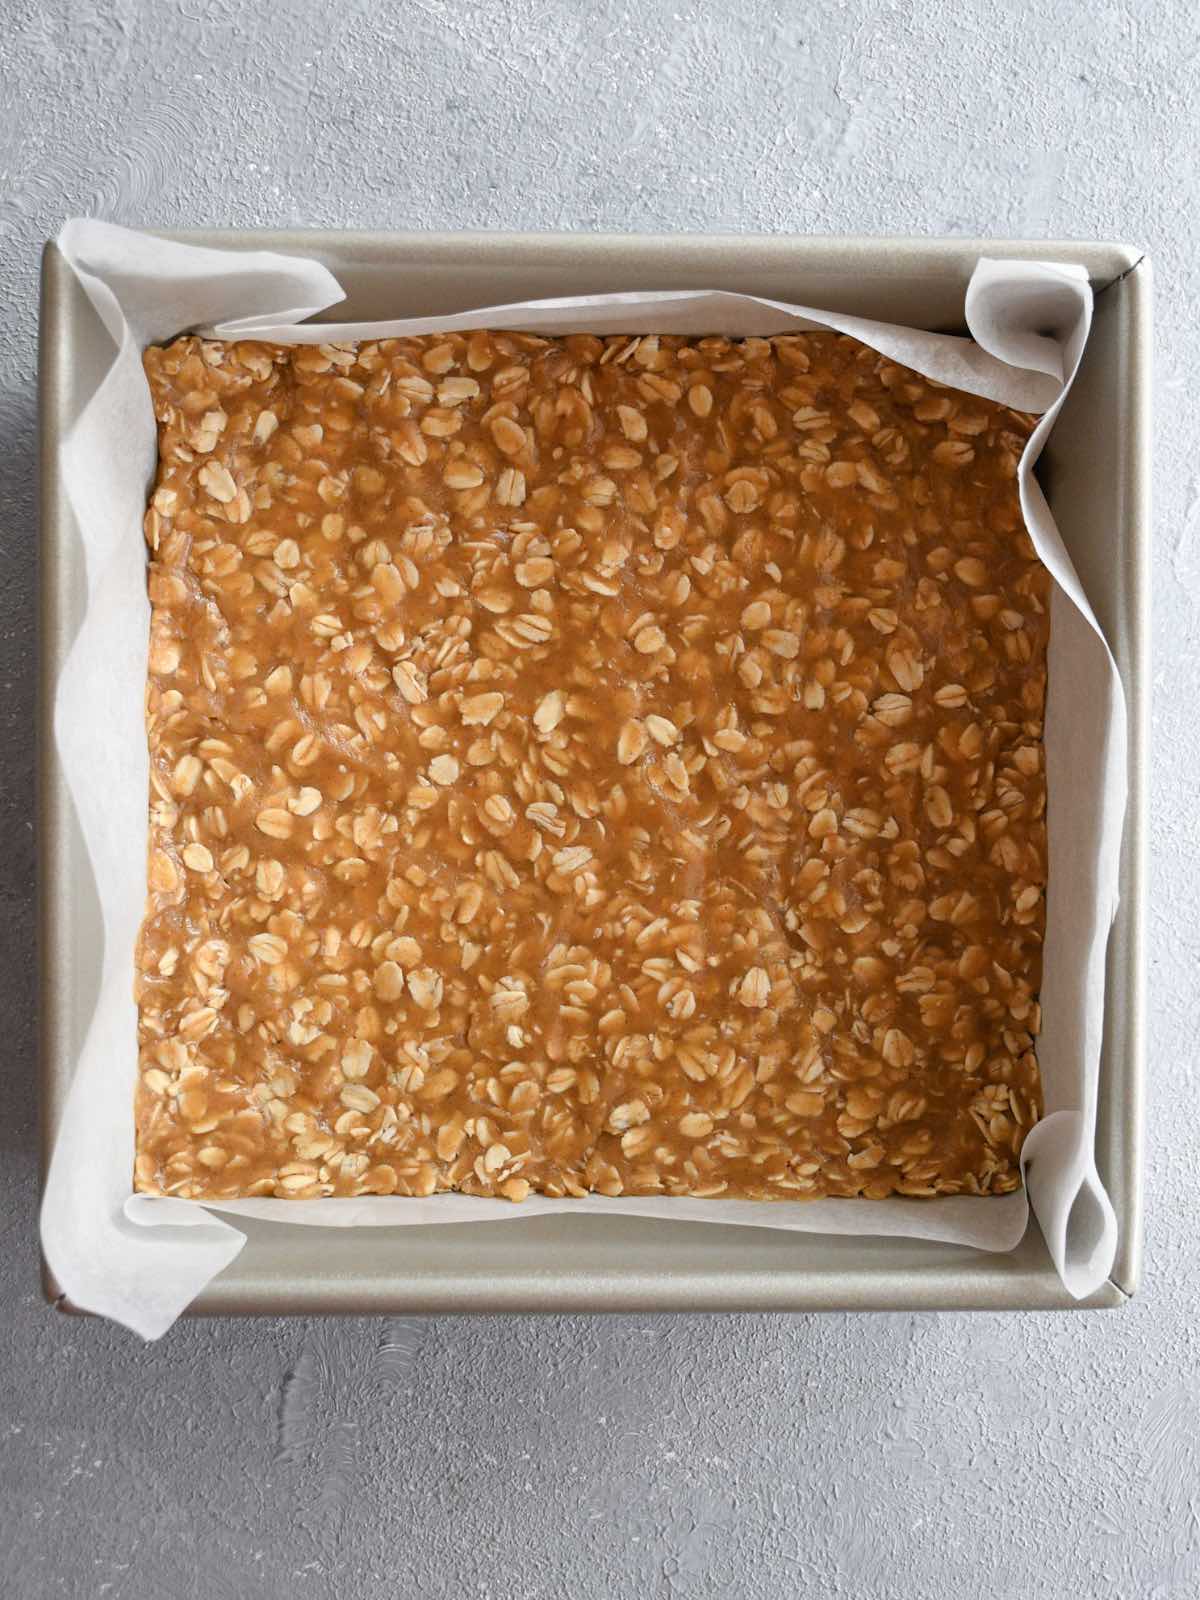 oatmeal crust pressed into an 8"x8" square baking pan.